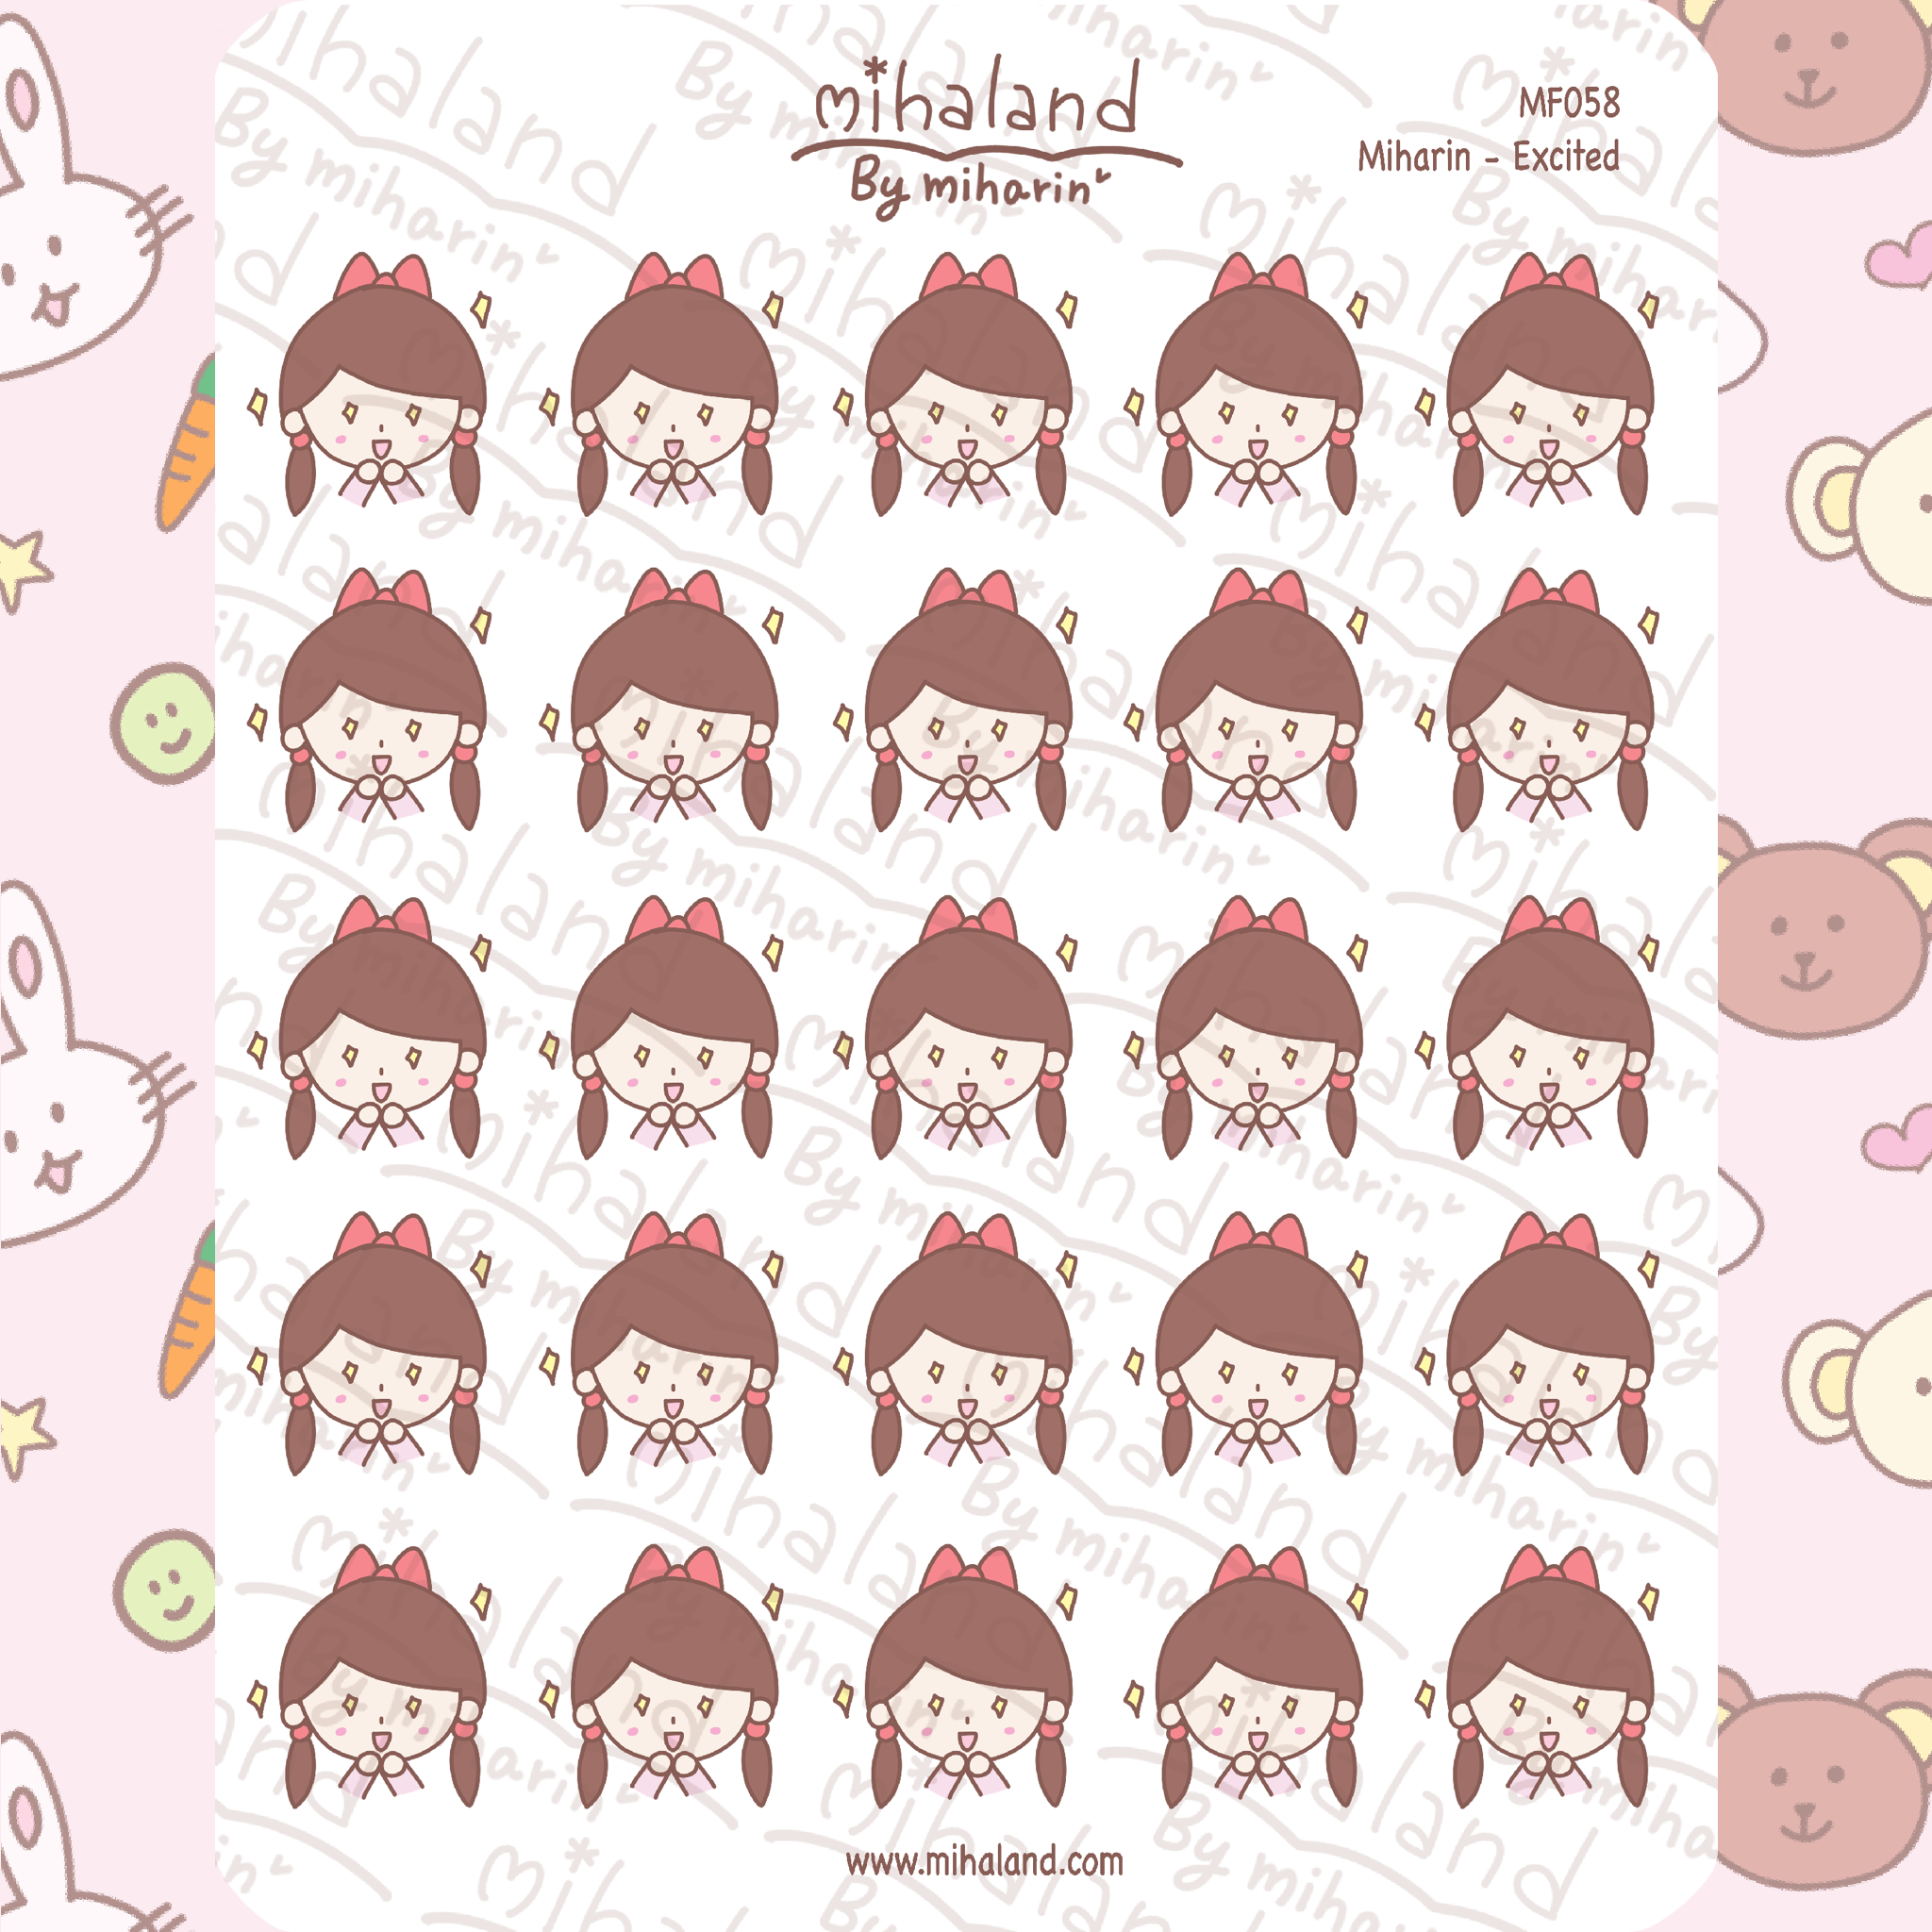 Miharin - Excited Planner Stickers (MF058)